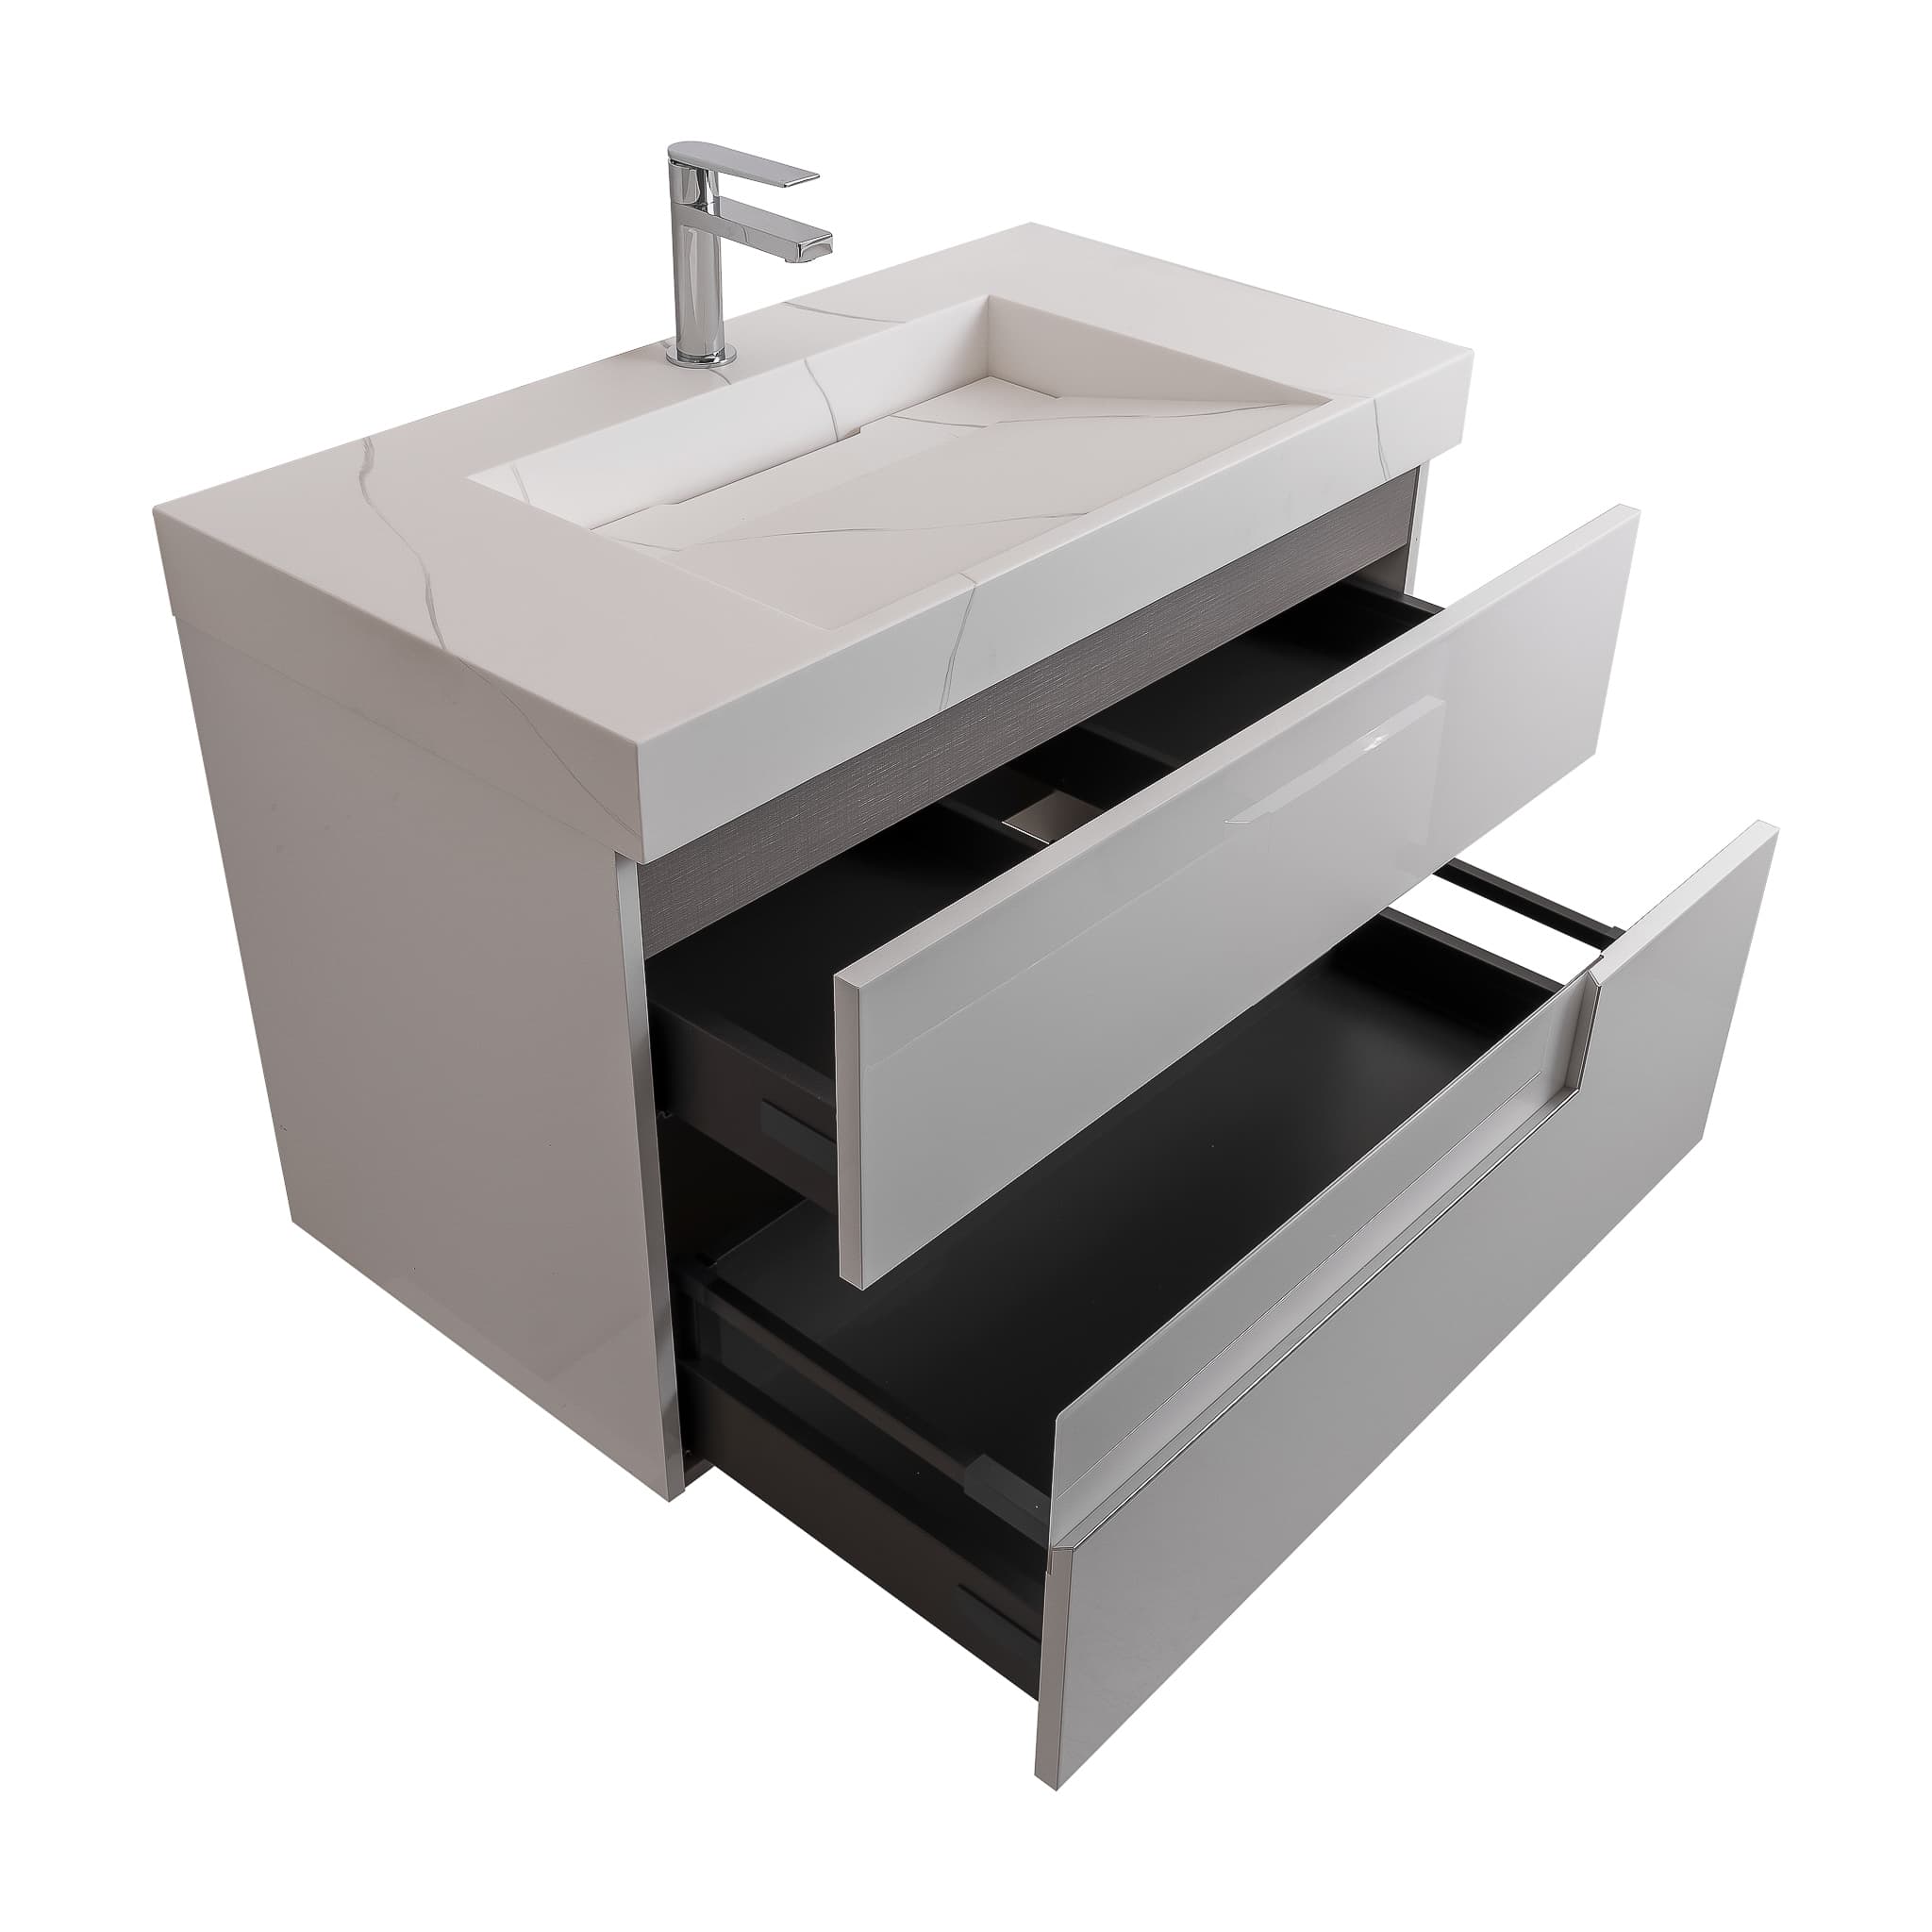 Vision 31.5 White High Gloss Cabinet, Solid Surface Matte White Top Carrara Infinity Sink, Wall Mounted Modern Vanity Set